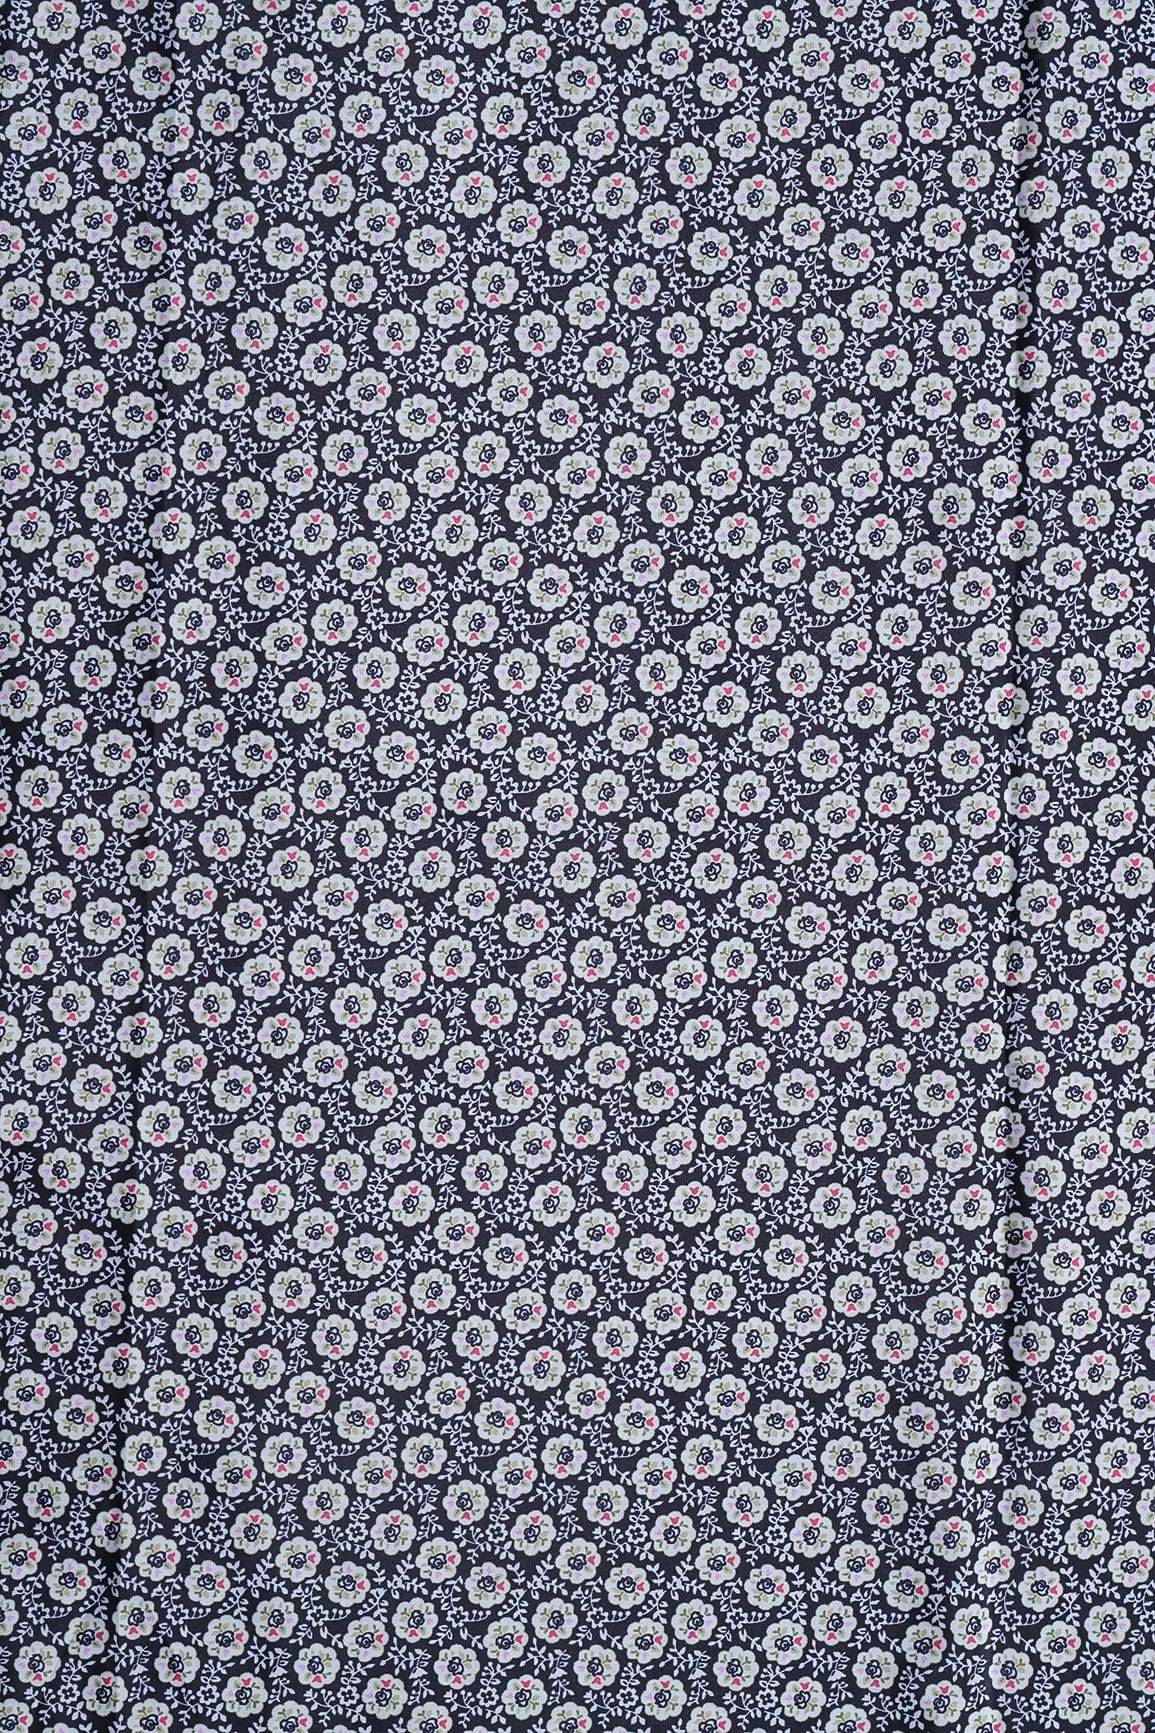 doeraa Prints White Floral Pattern Digital Print On Black French Crepe Fabric